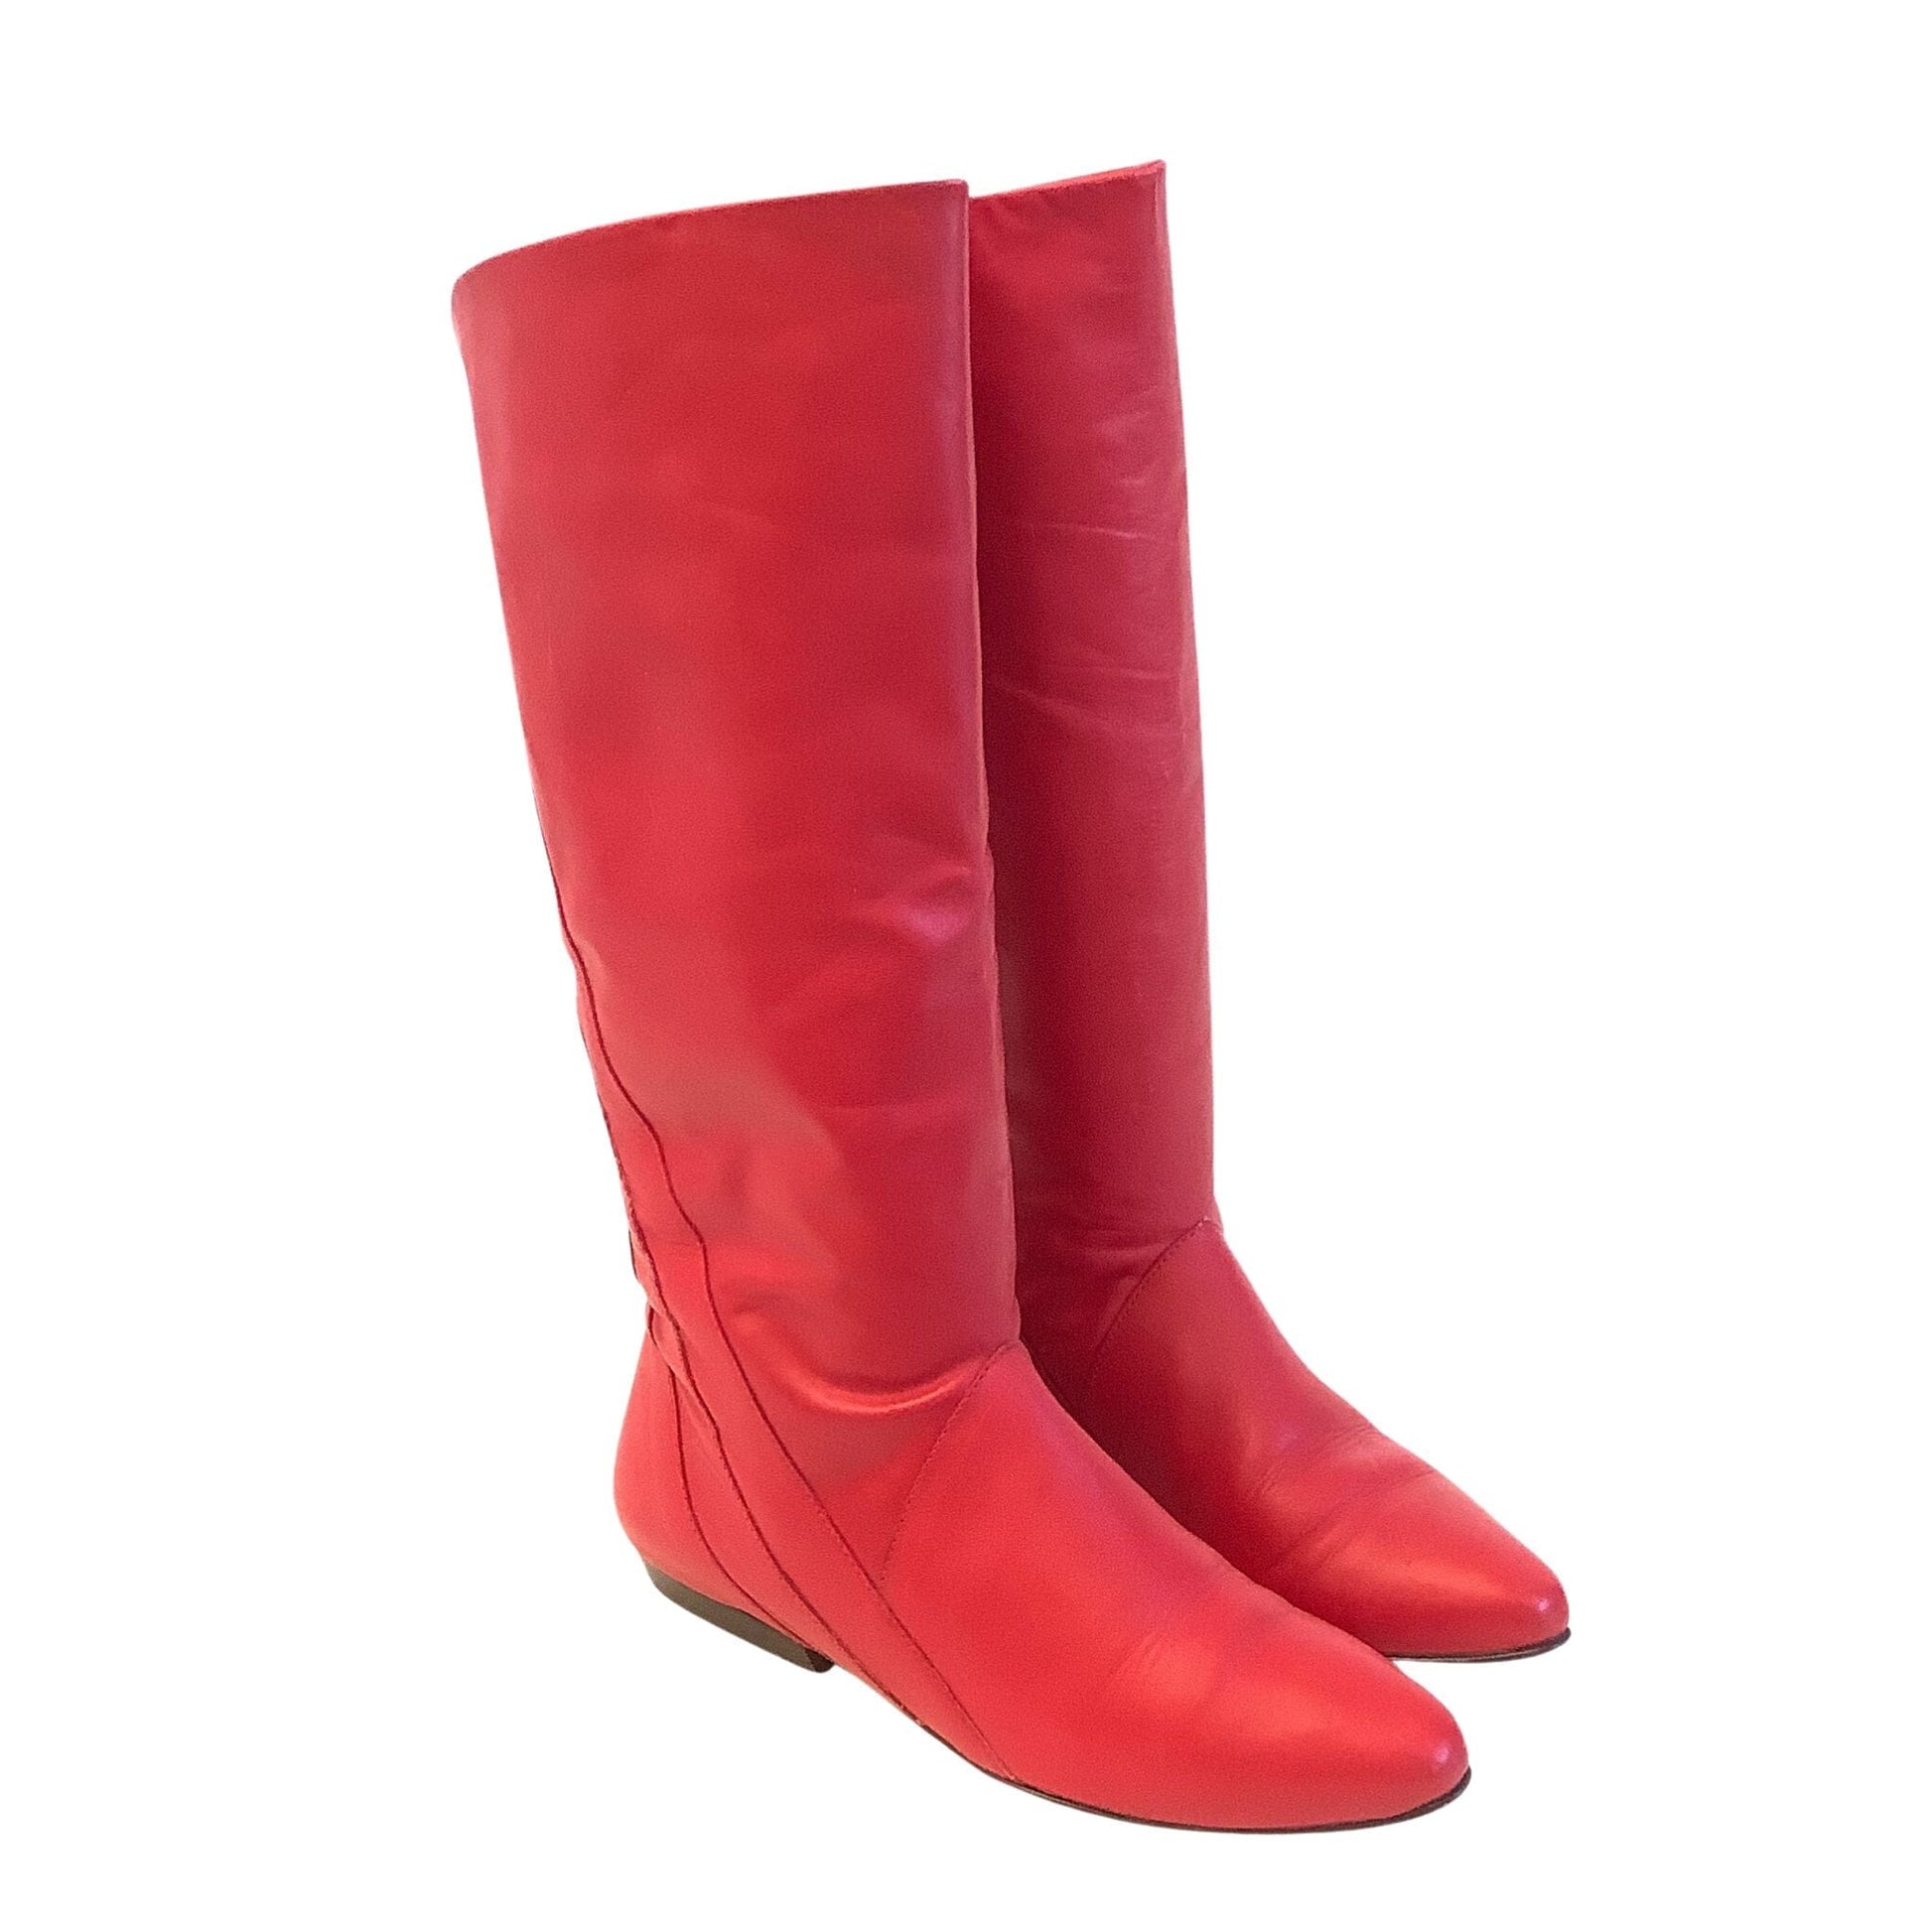 Vintage Red Leather Boots 7 / Red / Vintage 1980s